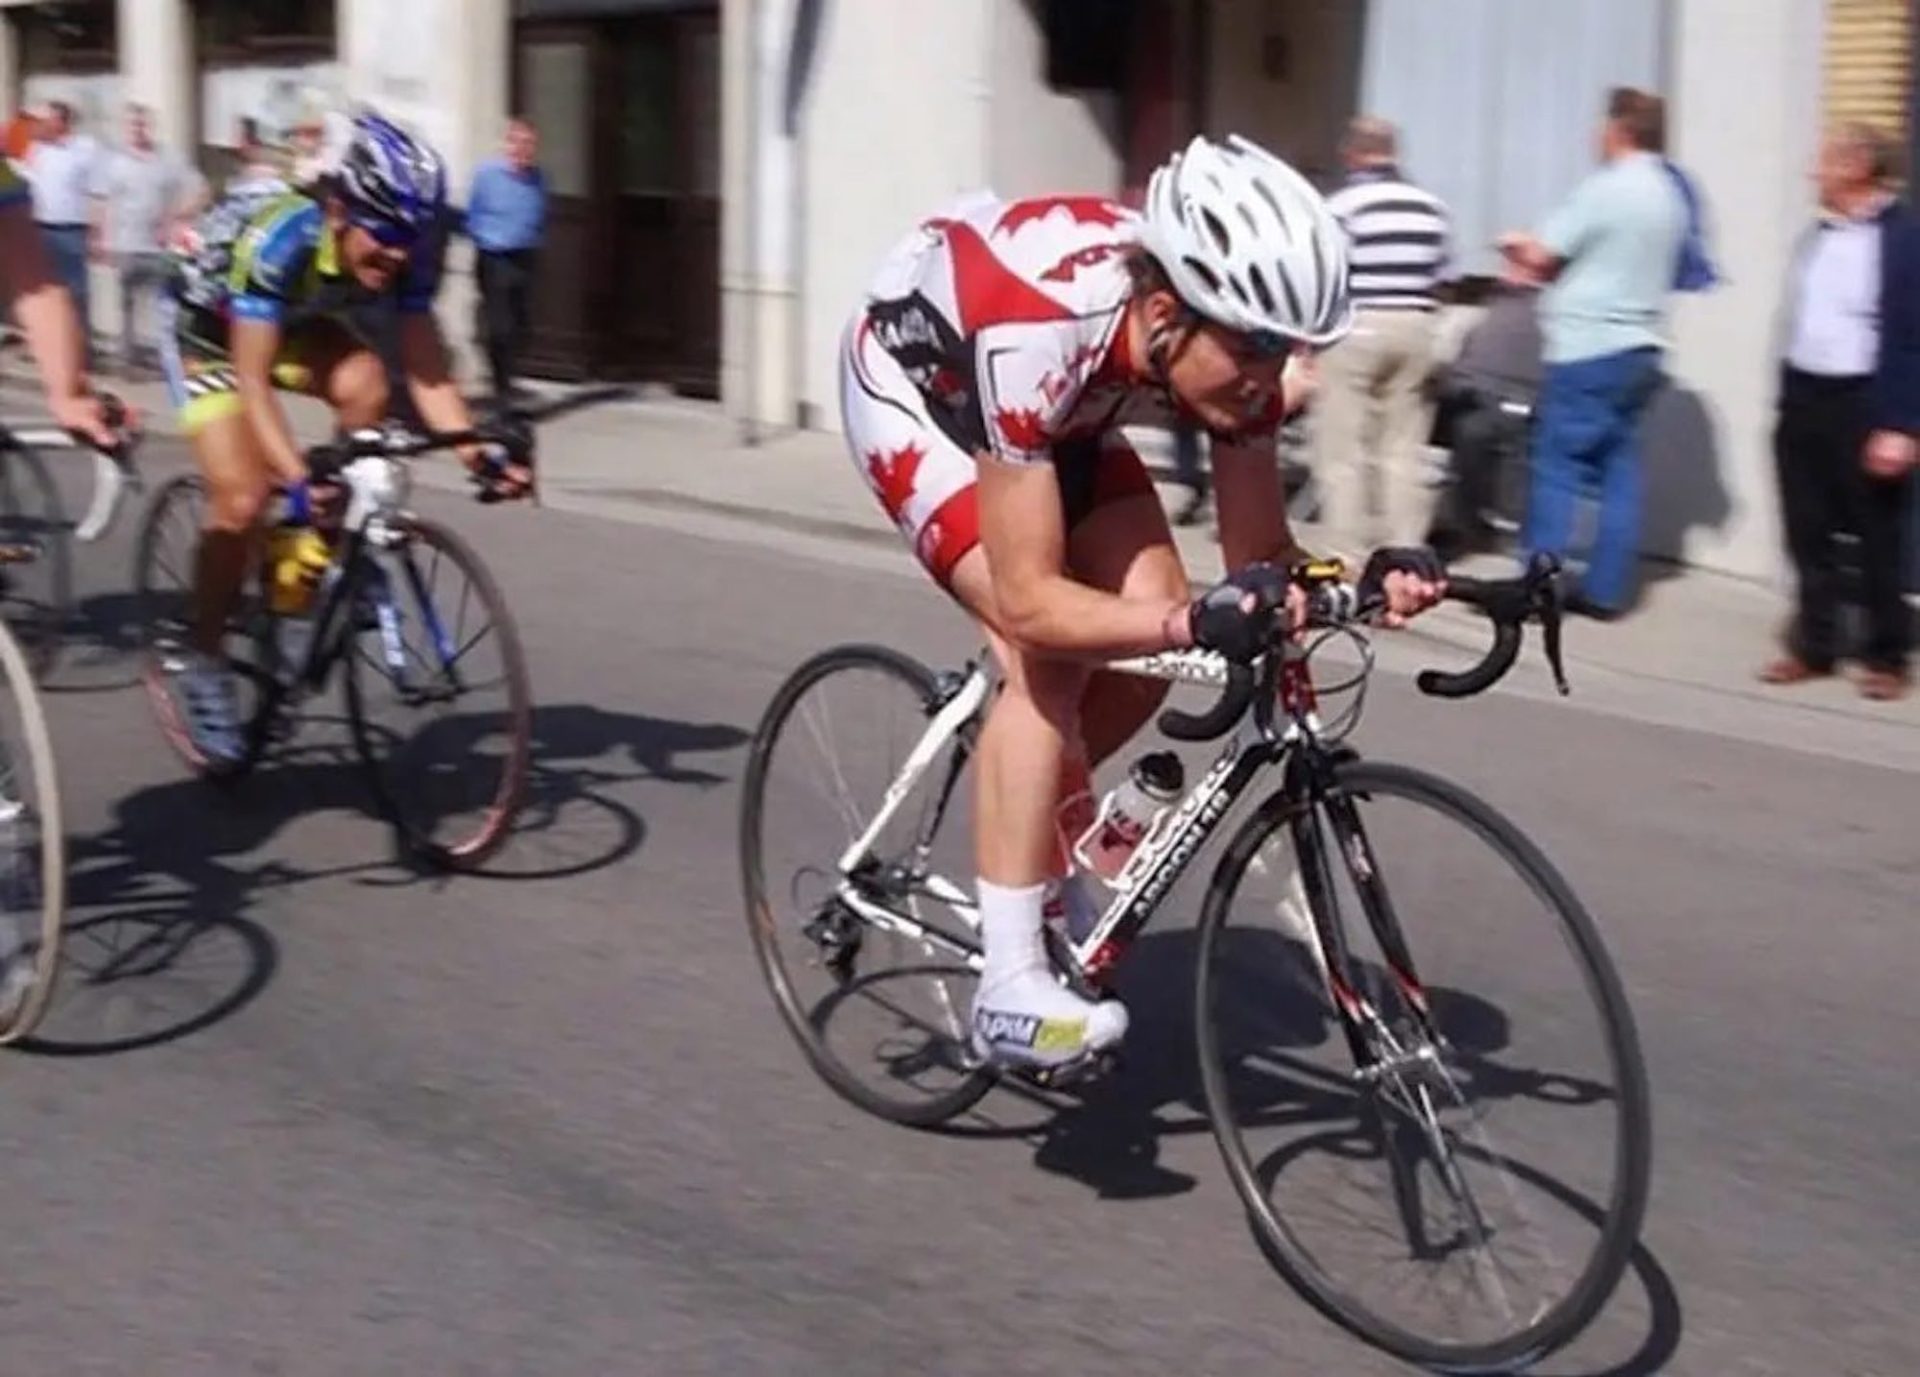 Keir Plaice races on a busy urban circuit. He's slightly blurred from the speed, as he pushes the pace bent low over his white and black Argon 18 road bike, dressed in the white and red maple leaf Canada national team kit.